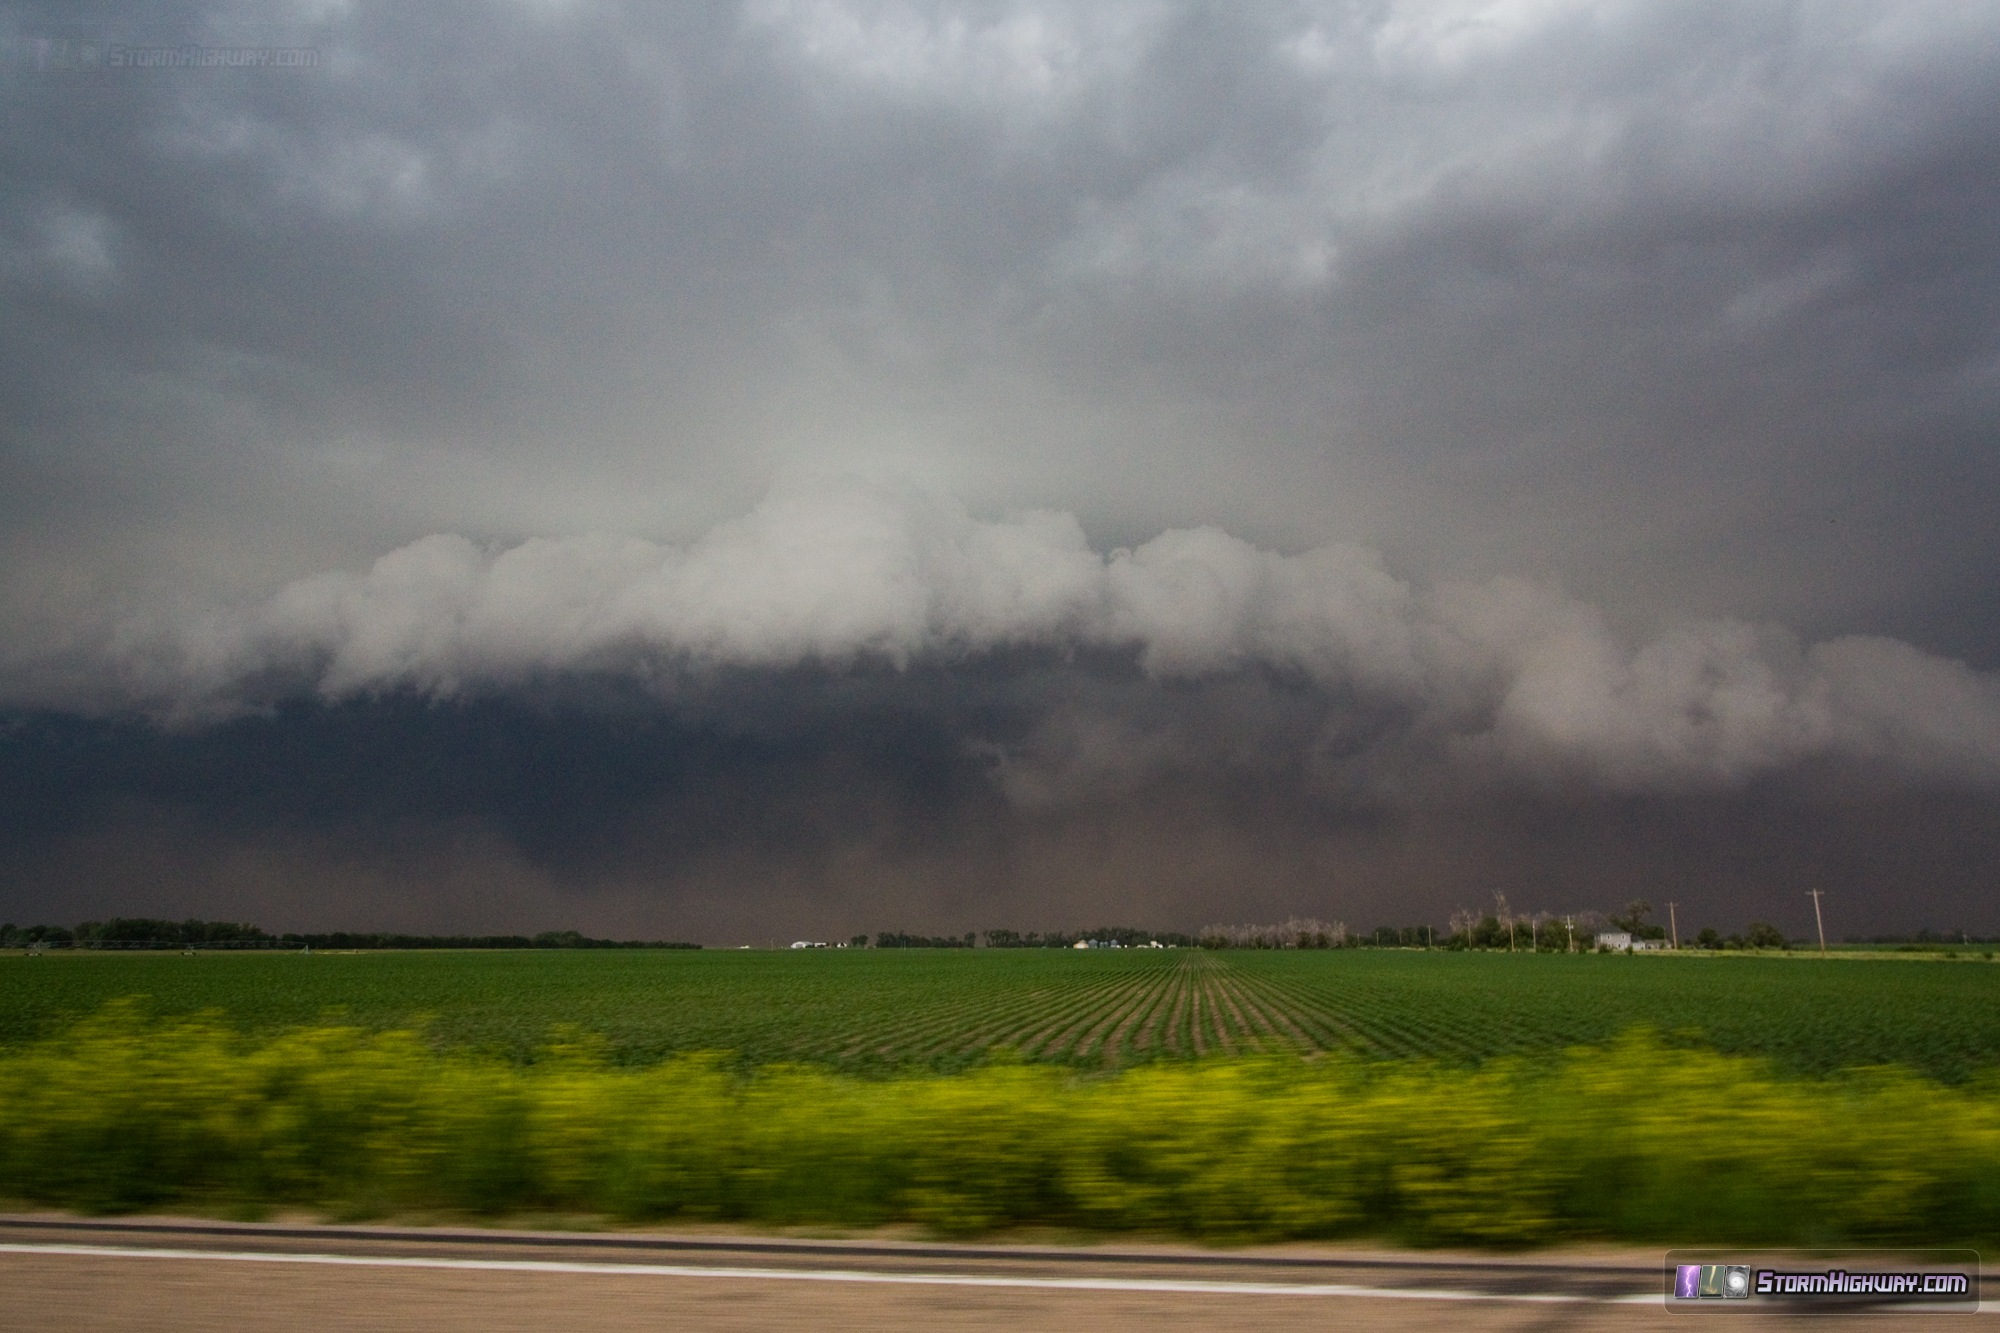 Supercell outflow with dirt plumes - Osceola, Nebraska - June 3, 2014